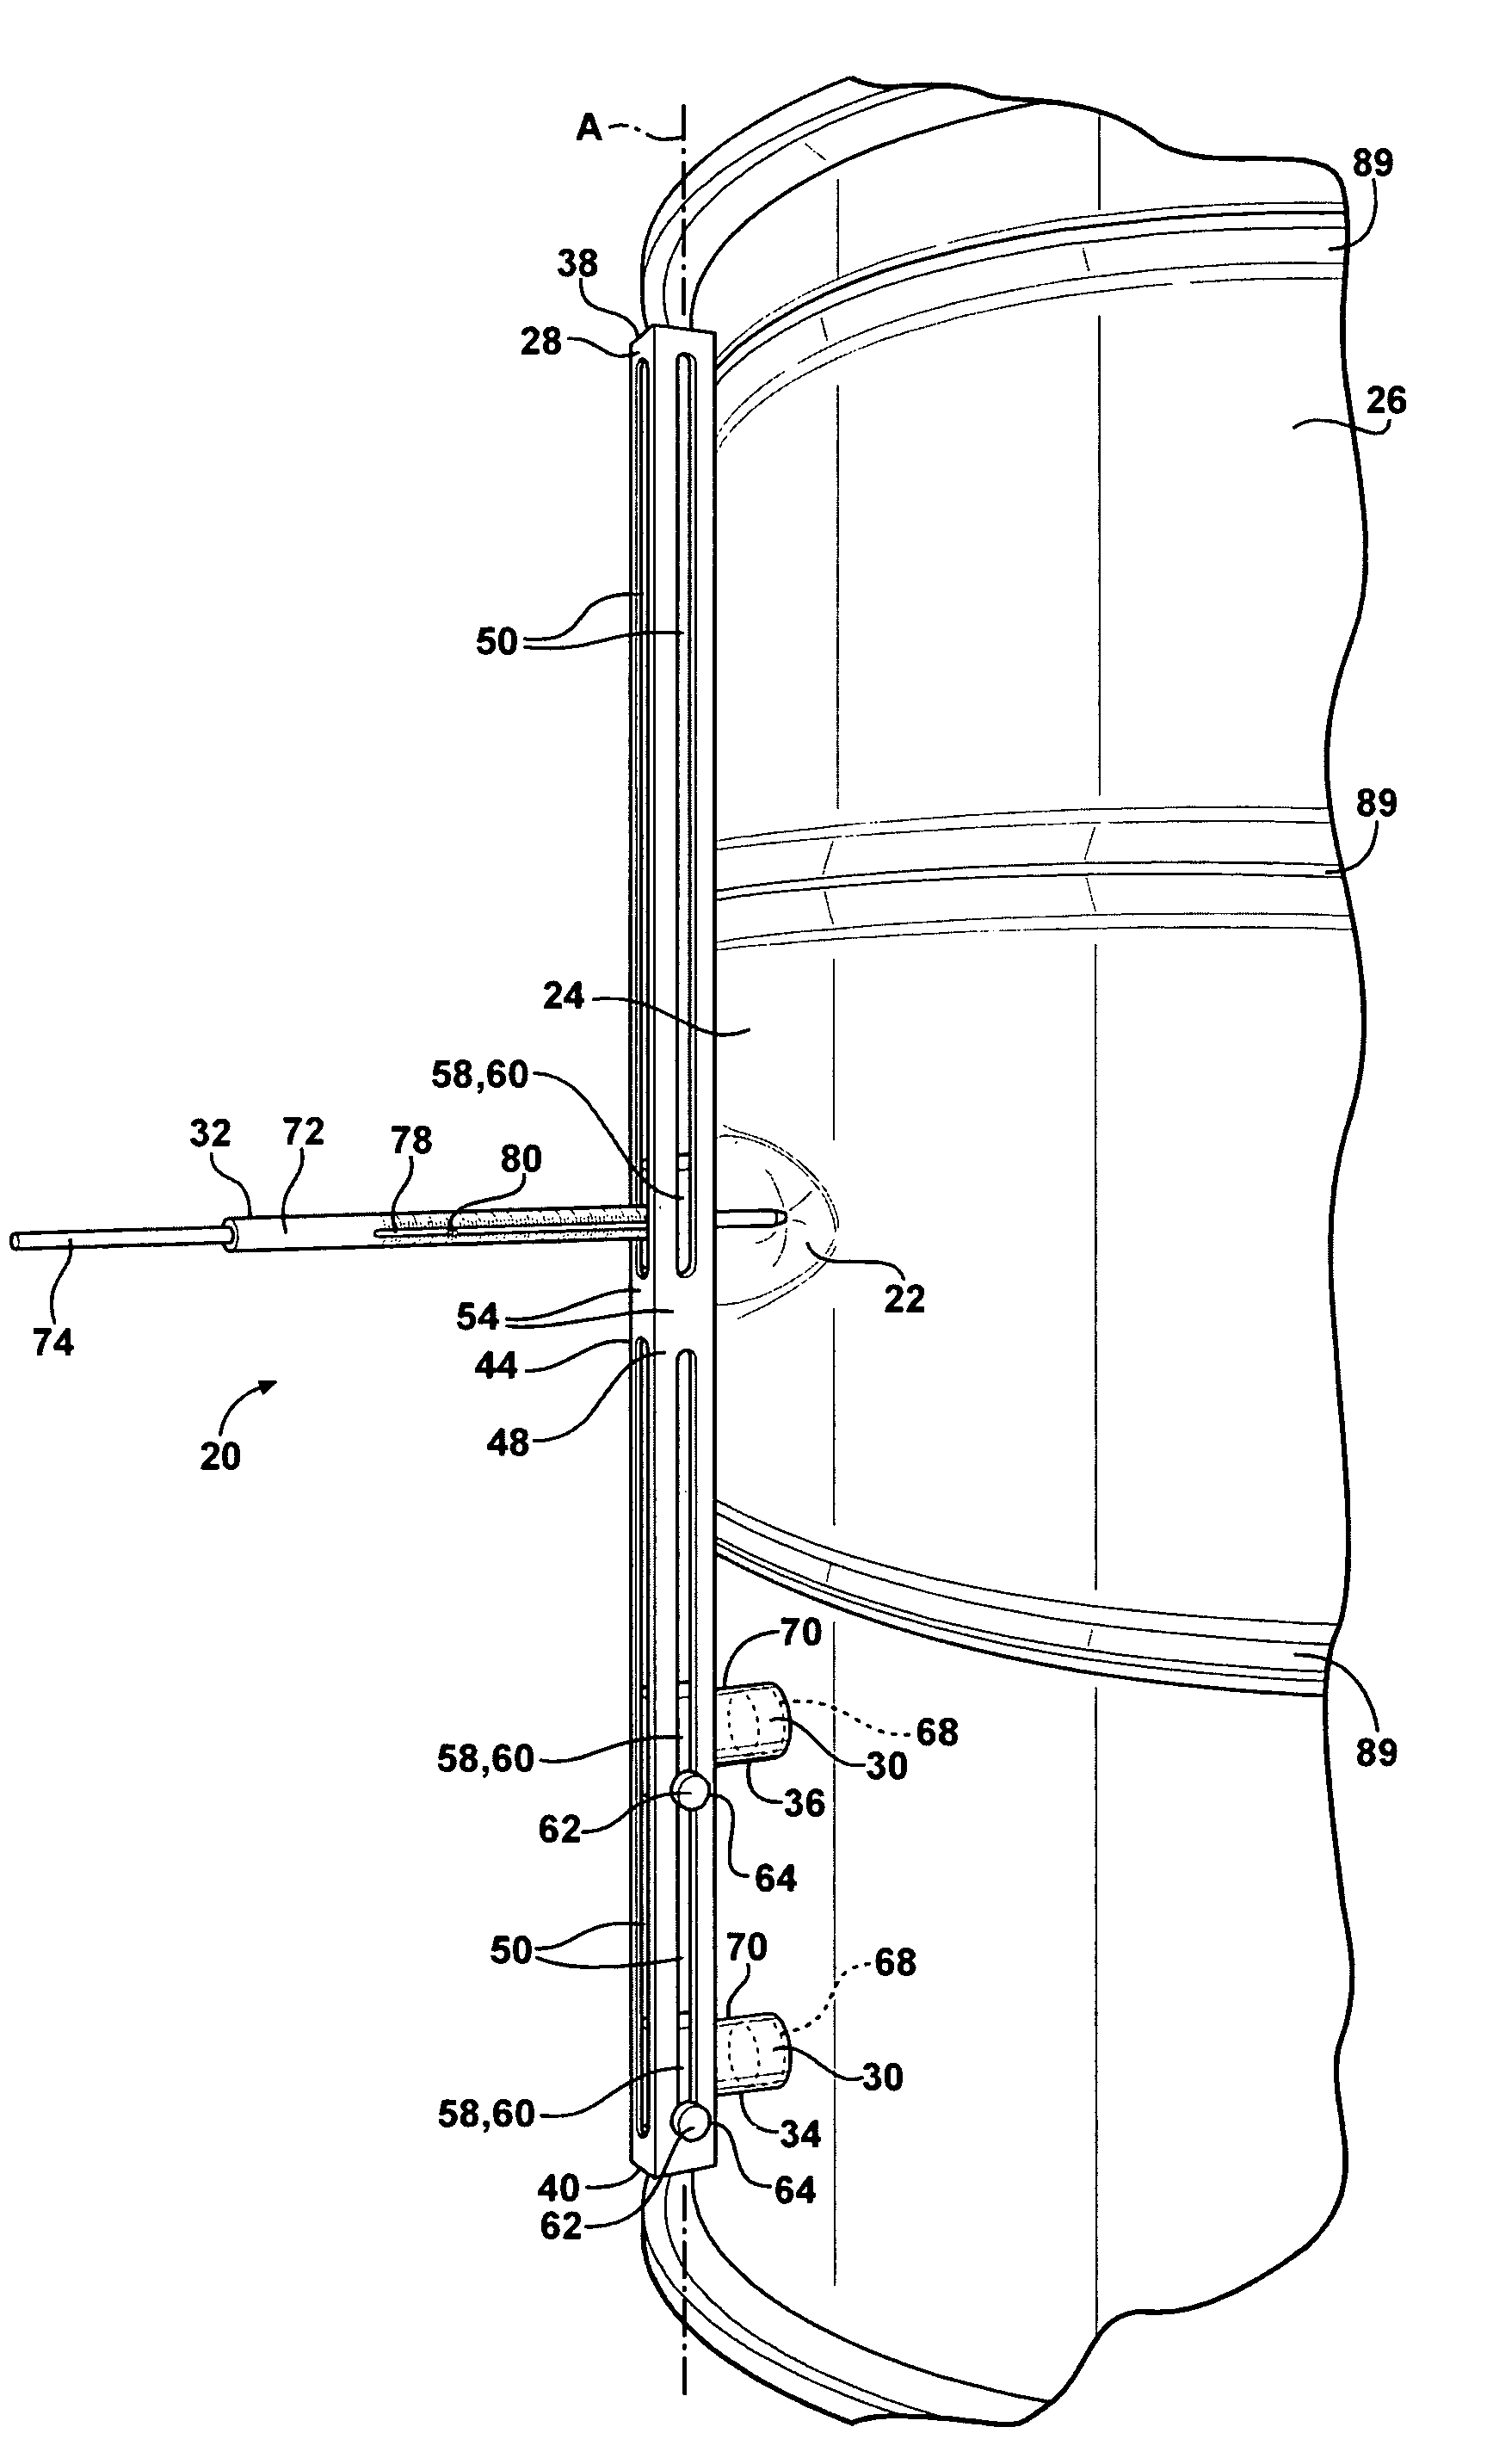 Method of measuring dents and method of classifying dents